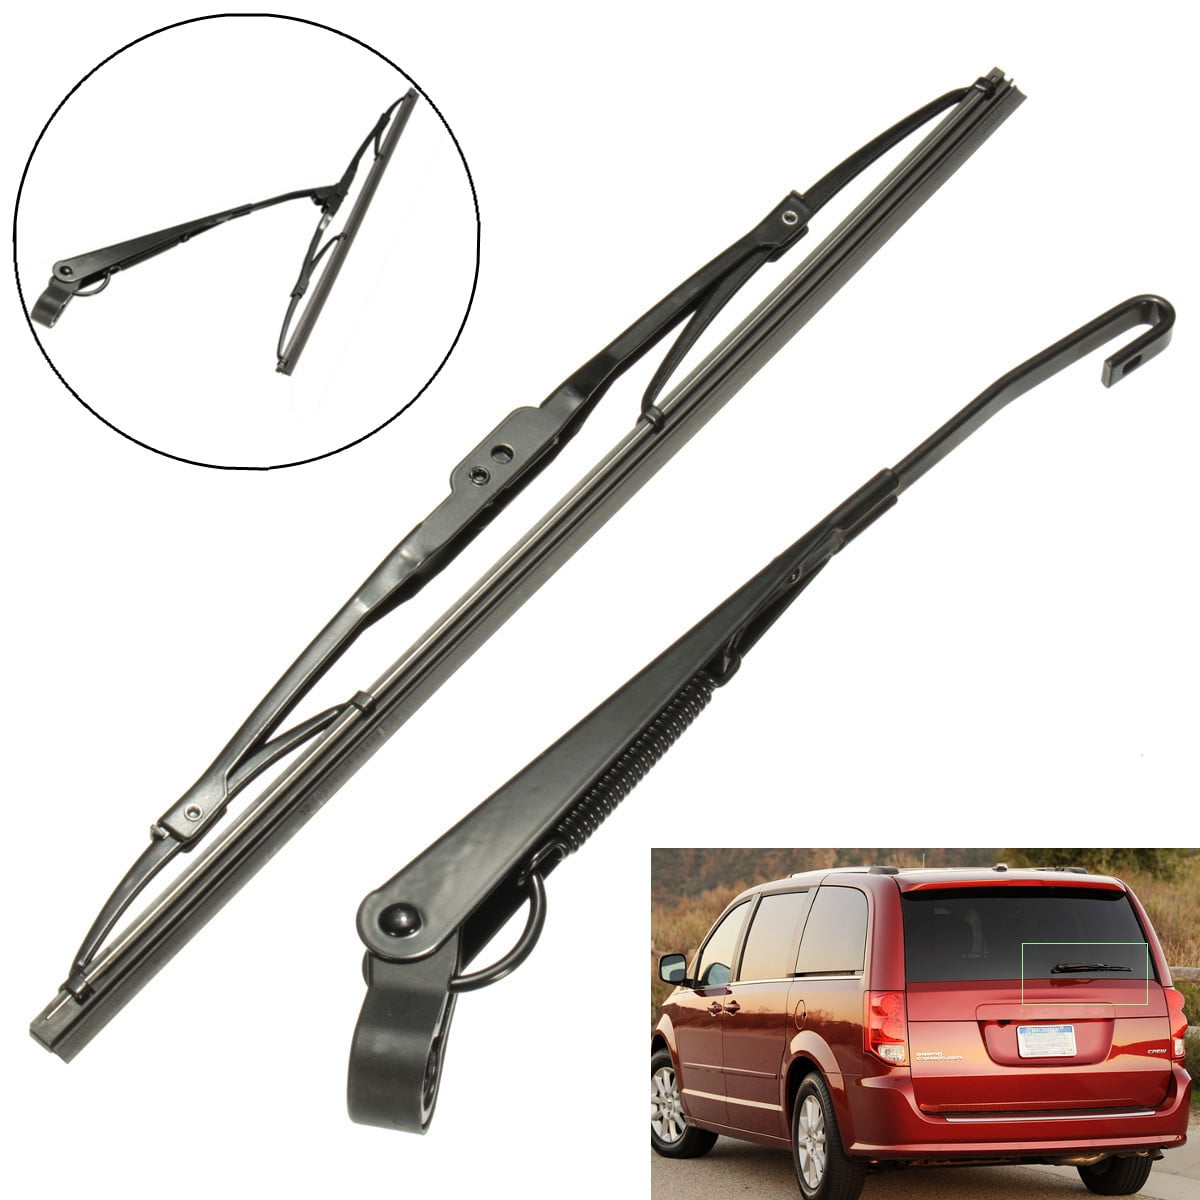 Car Rear Window Windscreen Wiper Arm Blade Stainless Steel Fits For Dodge Grand Caravan Town 2005 Town And Country Windshield Wiper Size